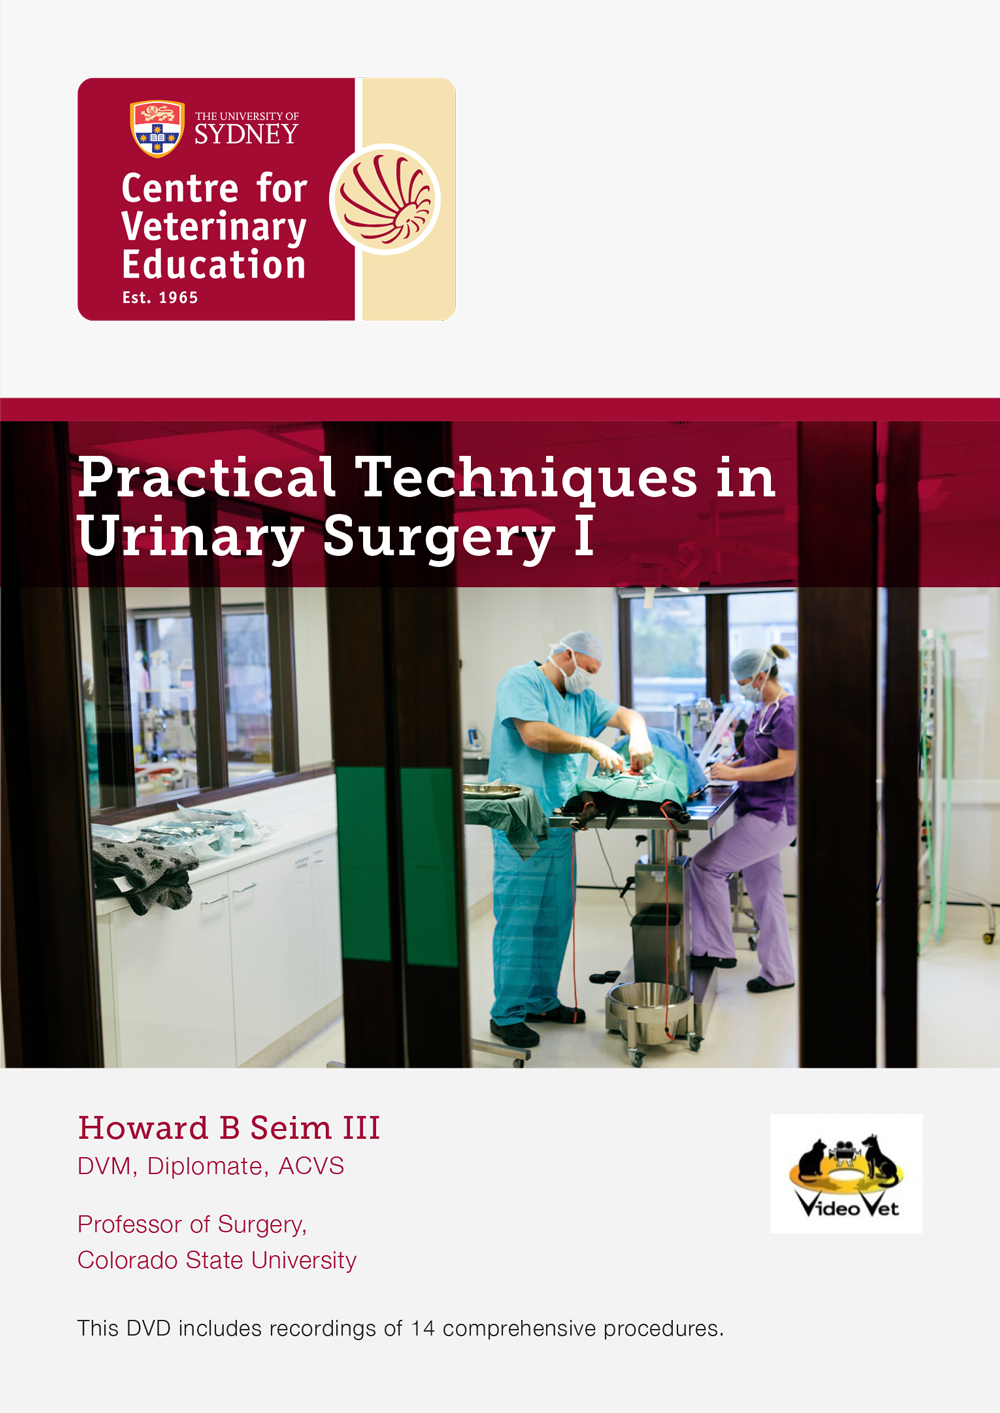 Practical Techniques in Urinary Surgery I